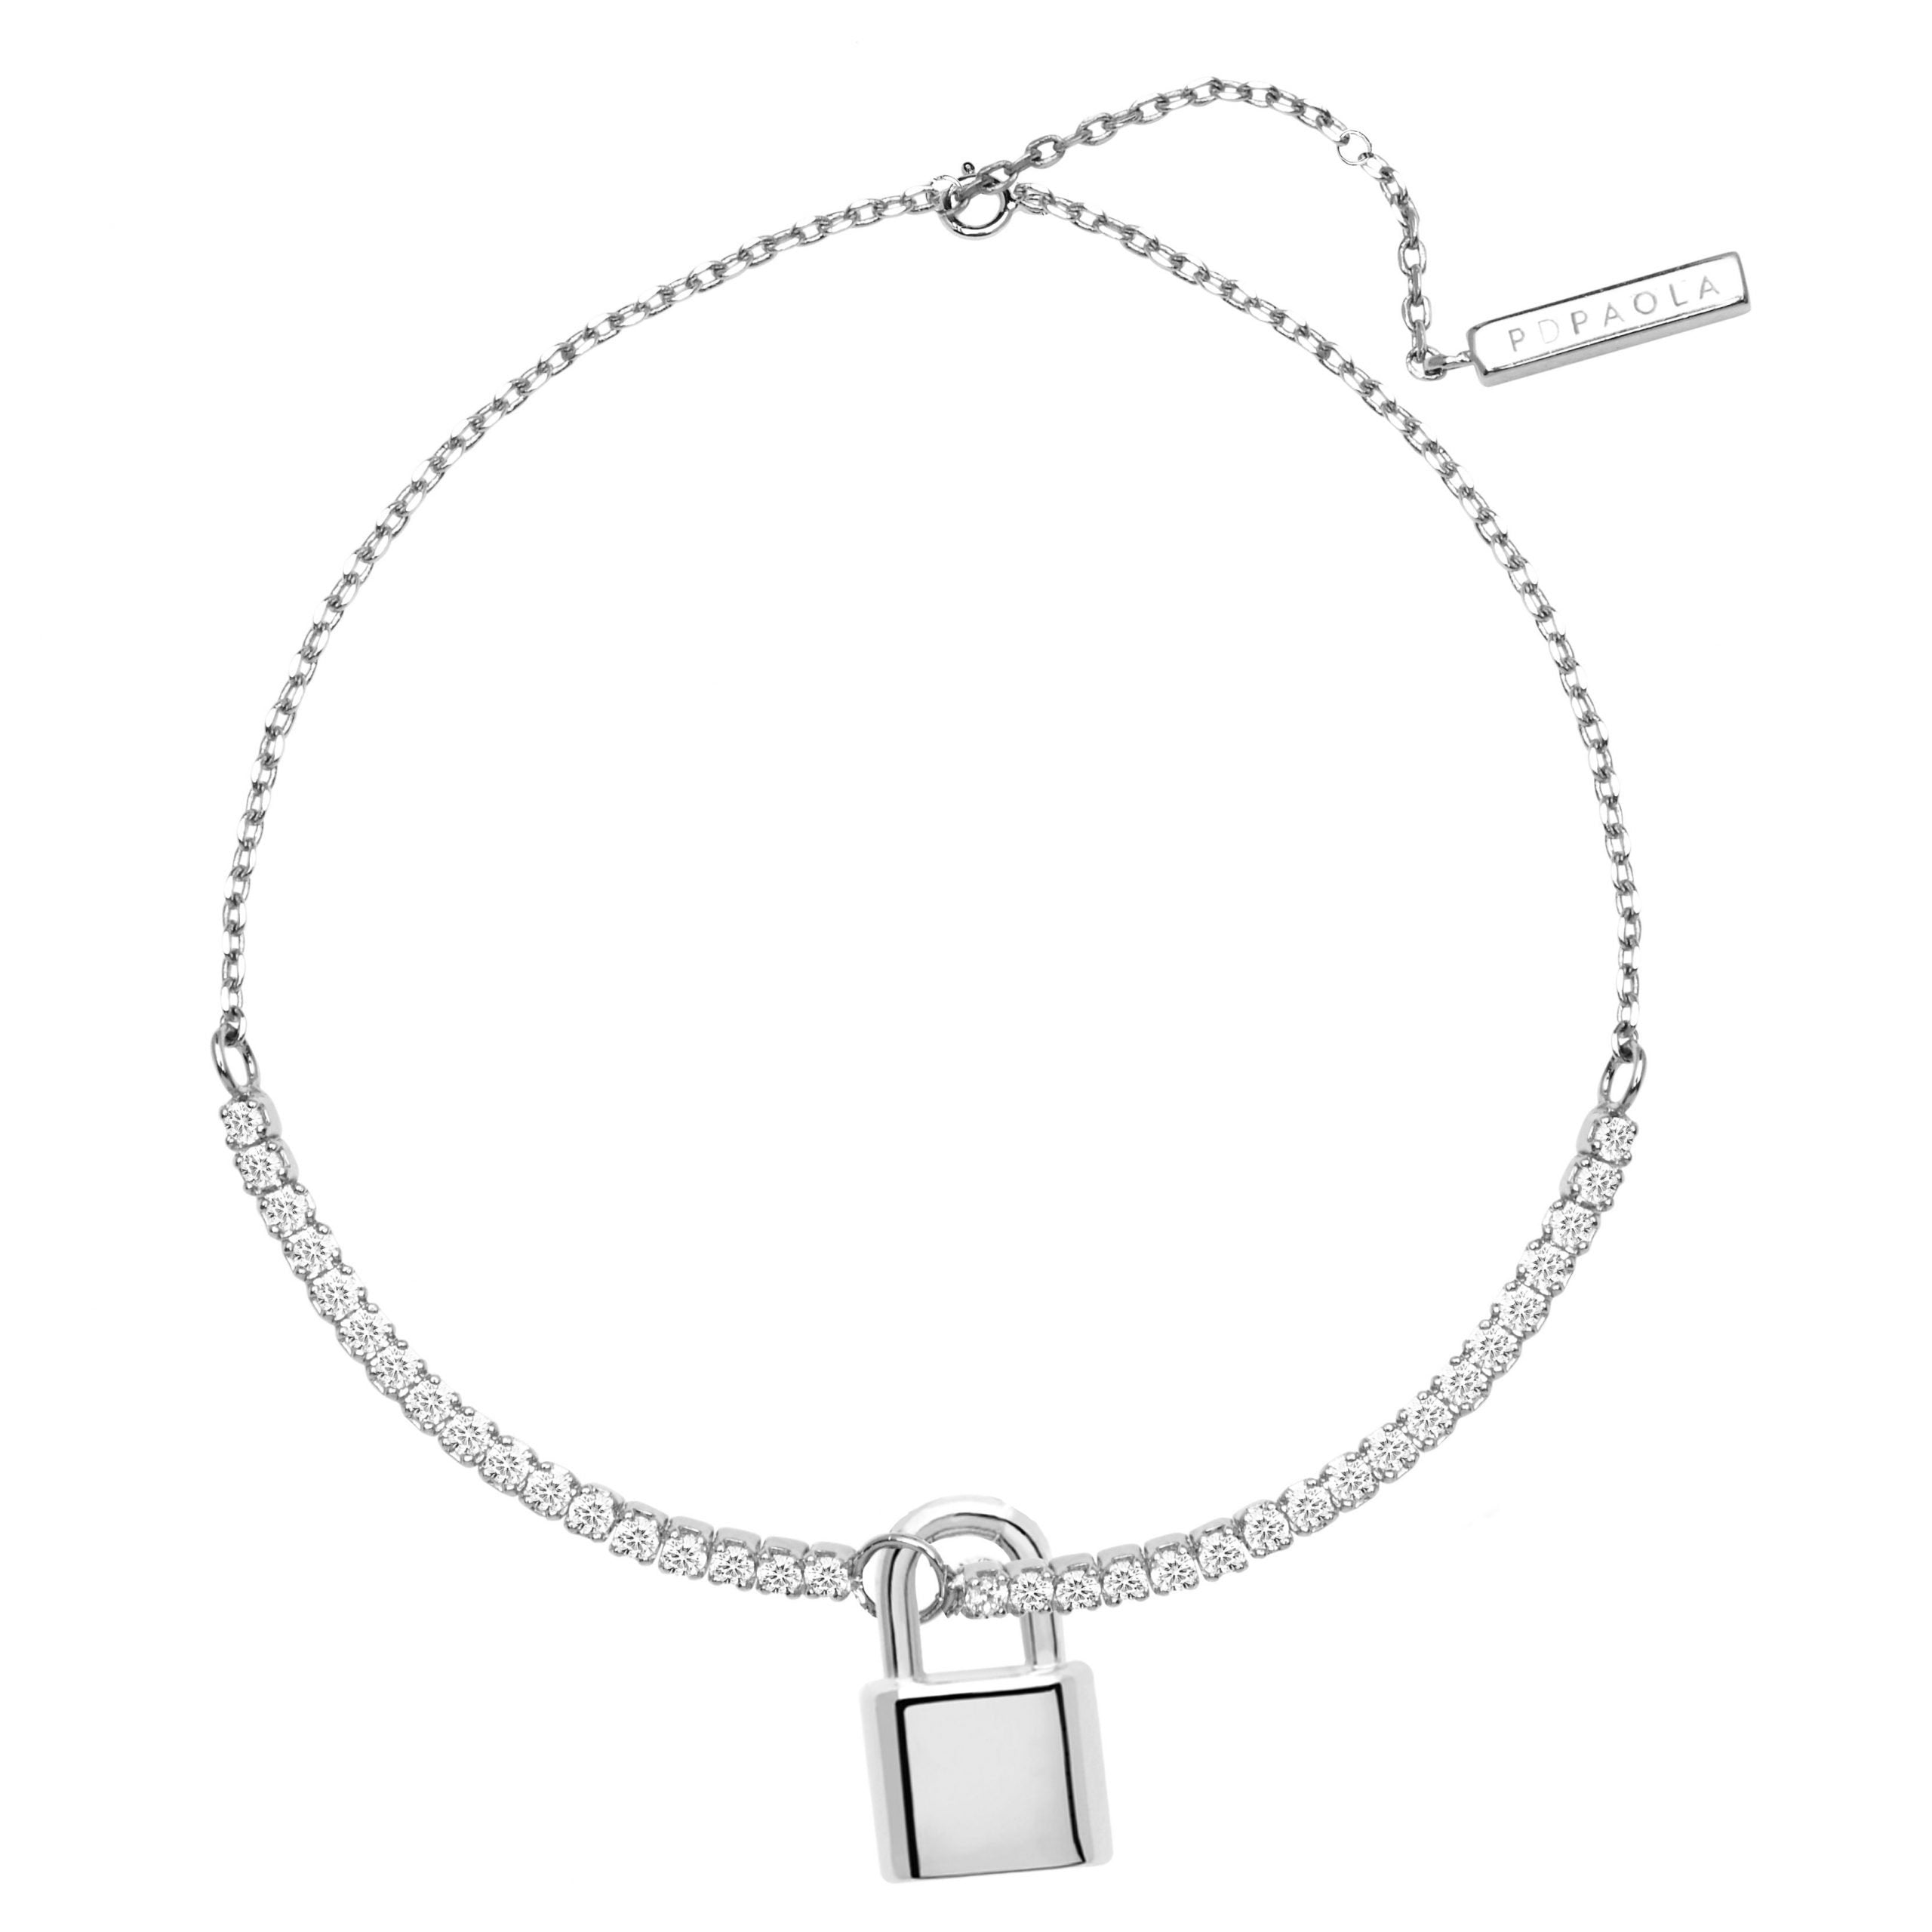 PD Paola Womens Silver Lock Necklace